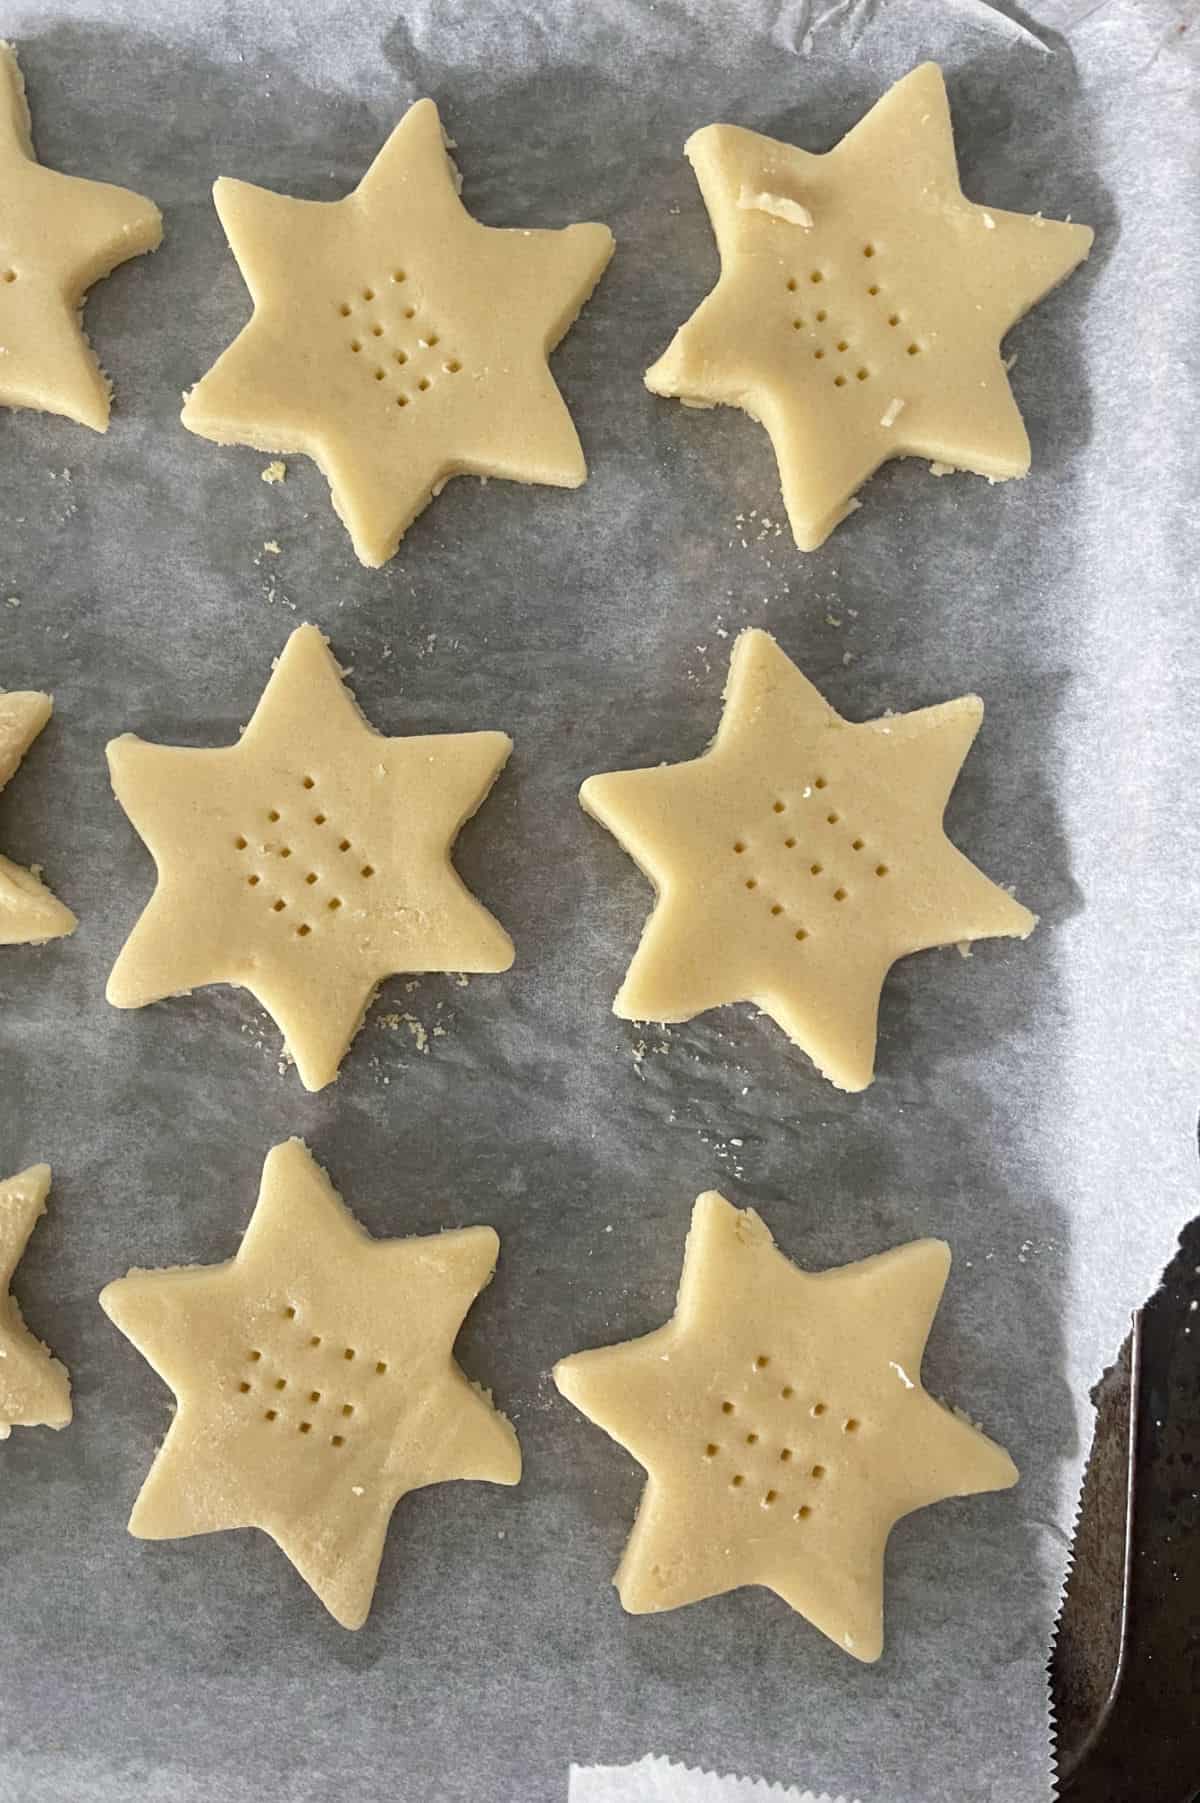 Shortbread stars on a baking tray lined with paper.